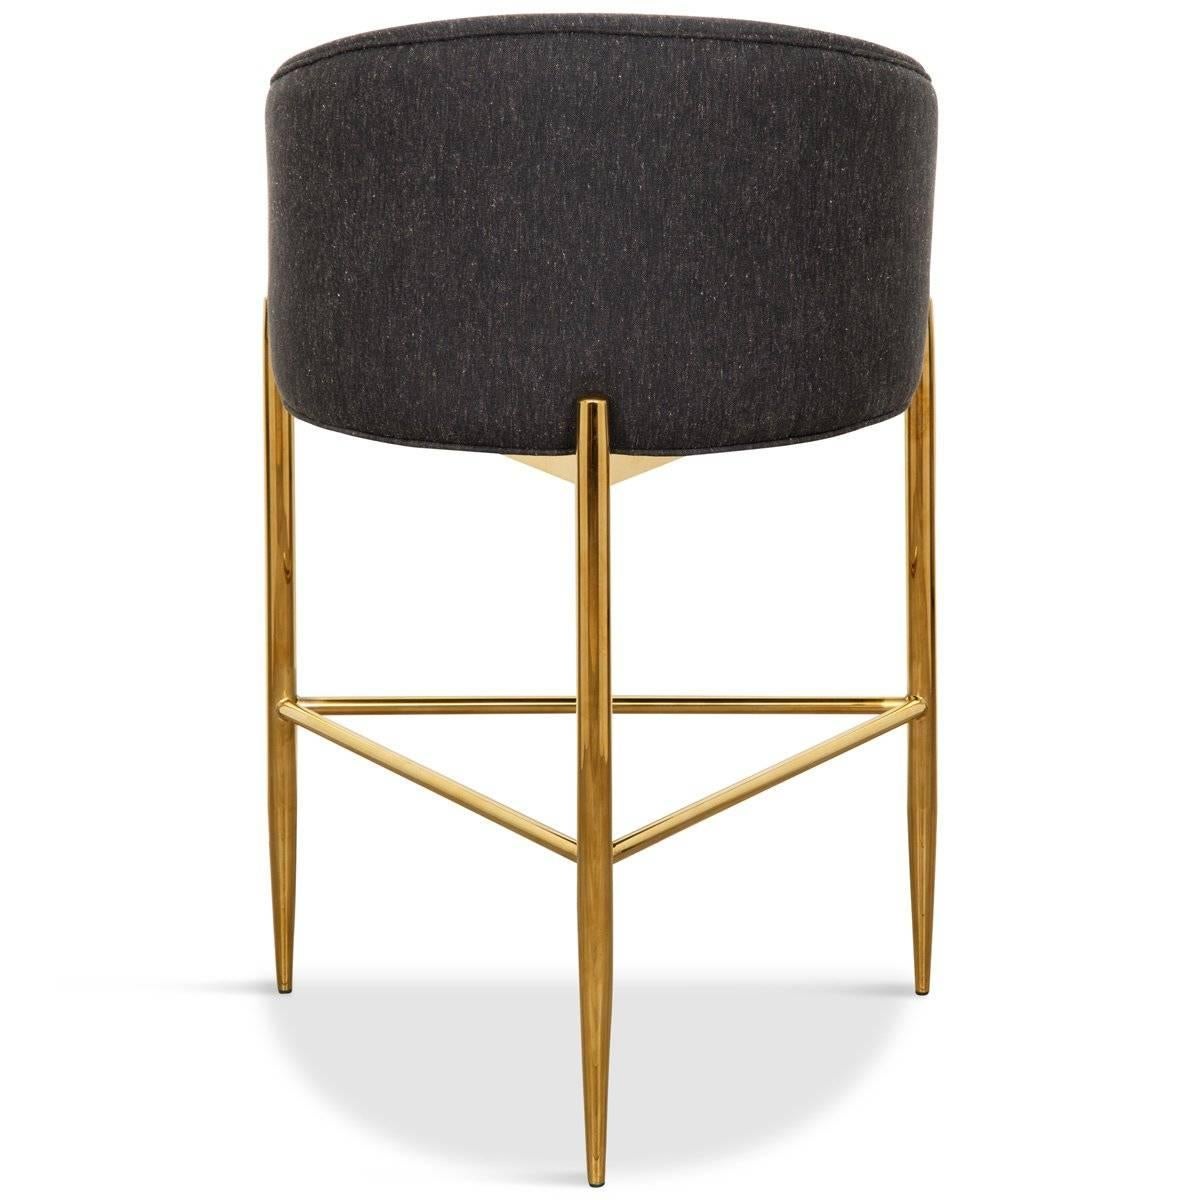 Similar in design to our Art Deco dining chair, this barstool is perfect for the bar. Sitting atop of a brass base with three long brass legs and featuring a curved upholstered back adding comfort and style to your entertaining space. What an